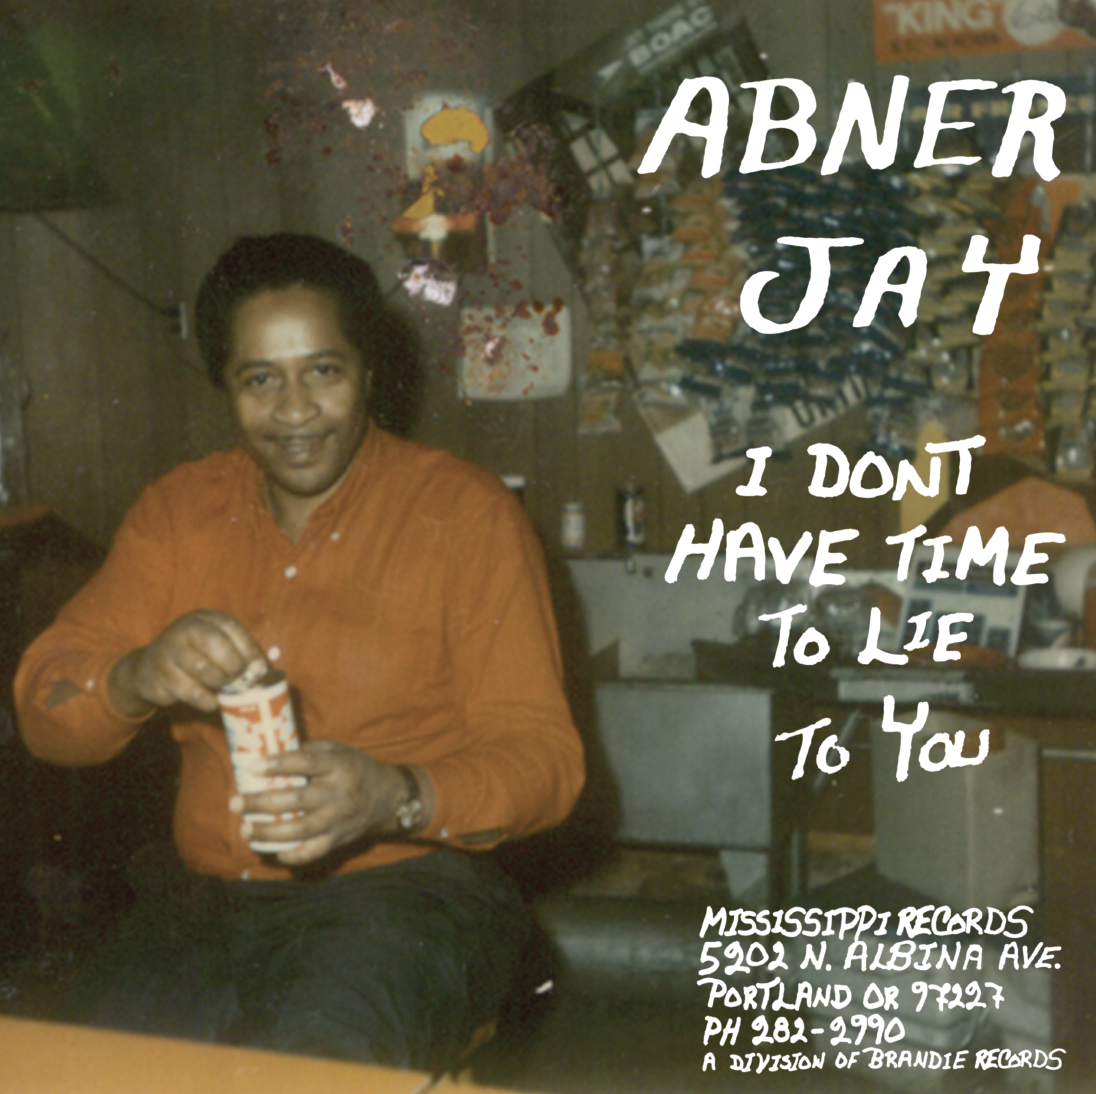 Abner Jay "I Don't Have Time To Lie To You" 1xLP [150G Black Vinyl]